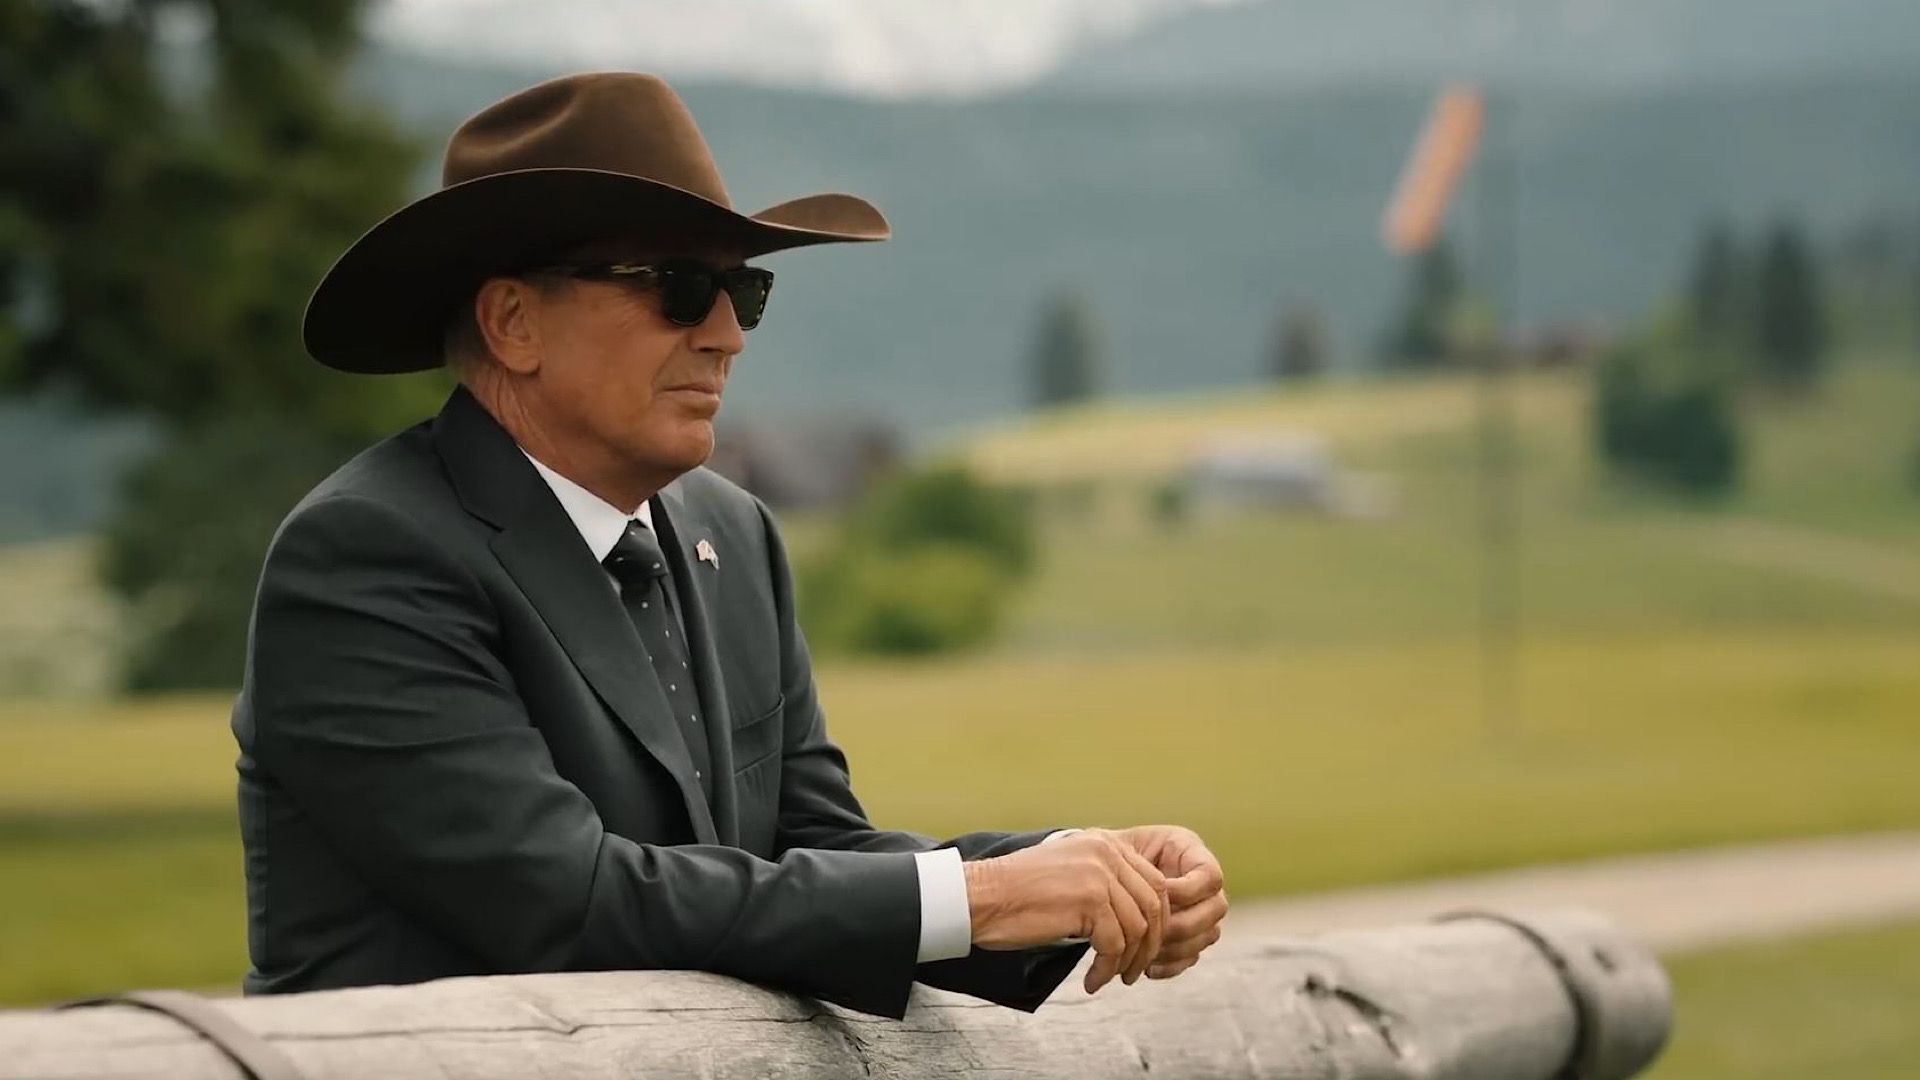 Kevin Costner as John Dutton in Yellowstone wearing sunglasses